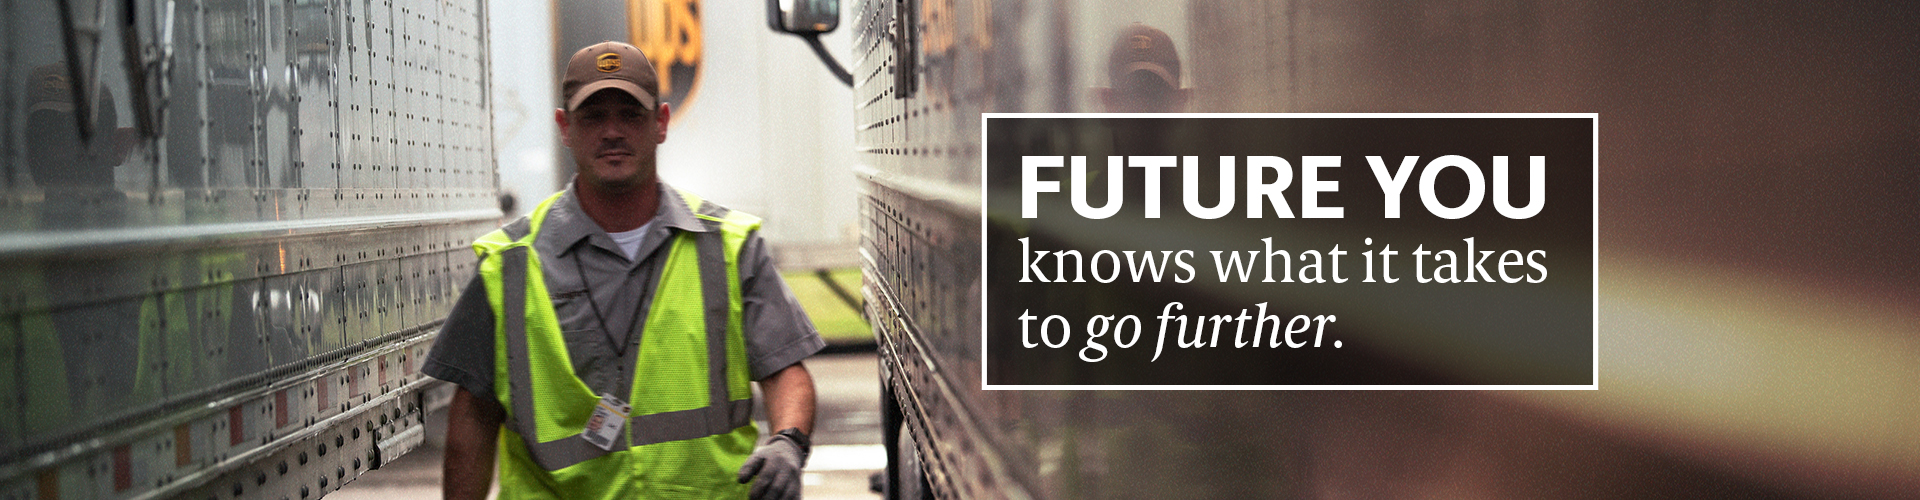 FUTURE YOU knows what it takes to go further.